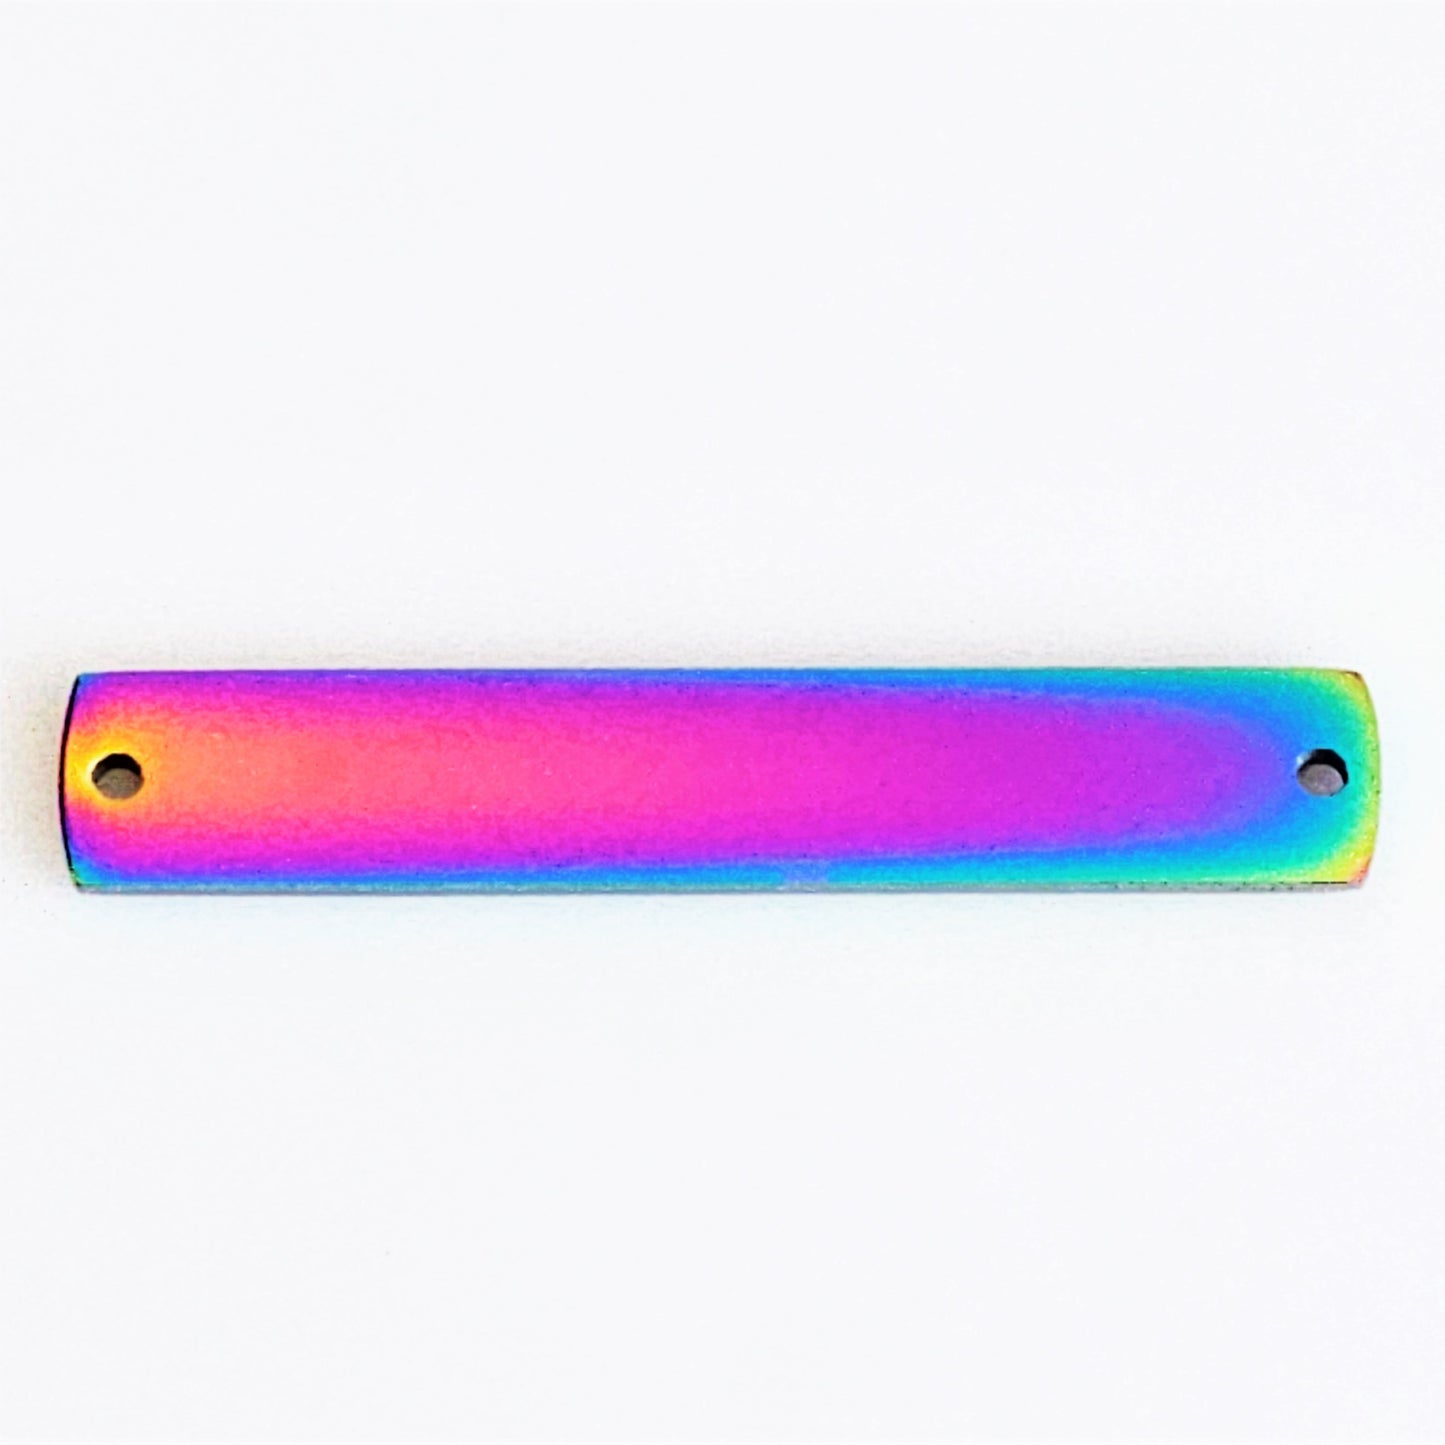 Rainbow Plated Stainless Steel - 1 1/4" Rectangle Bar (with holes)